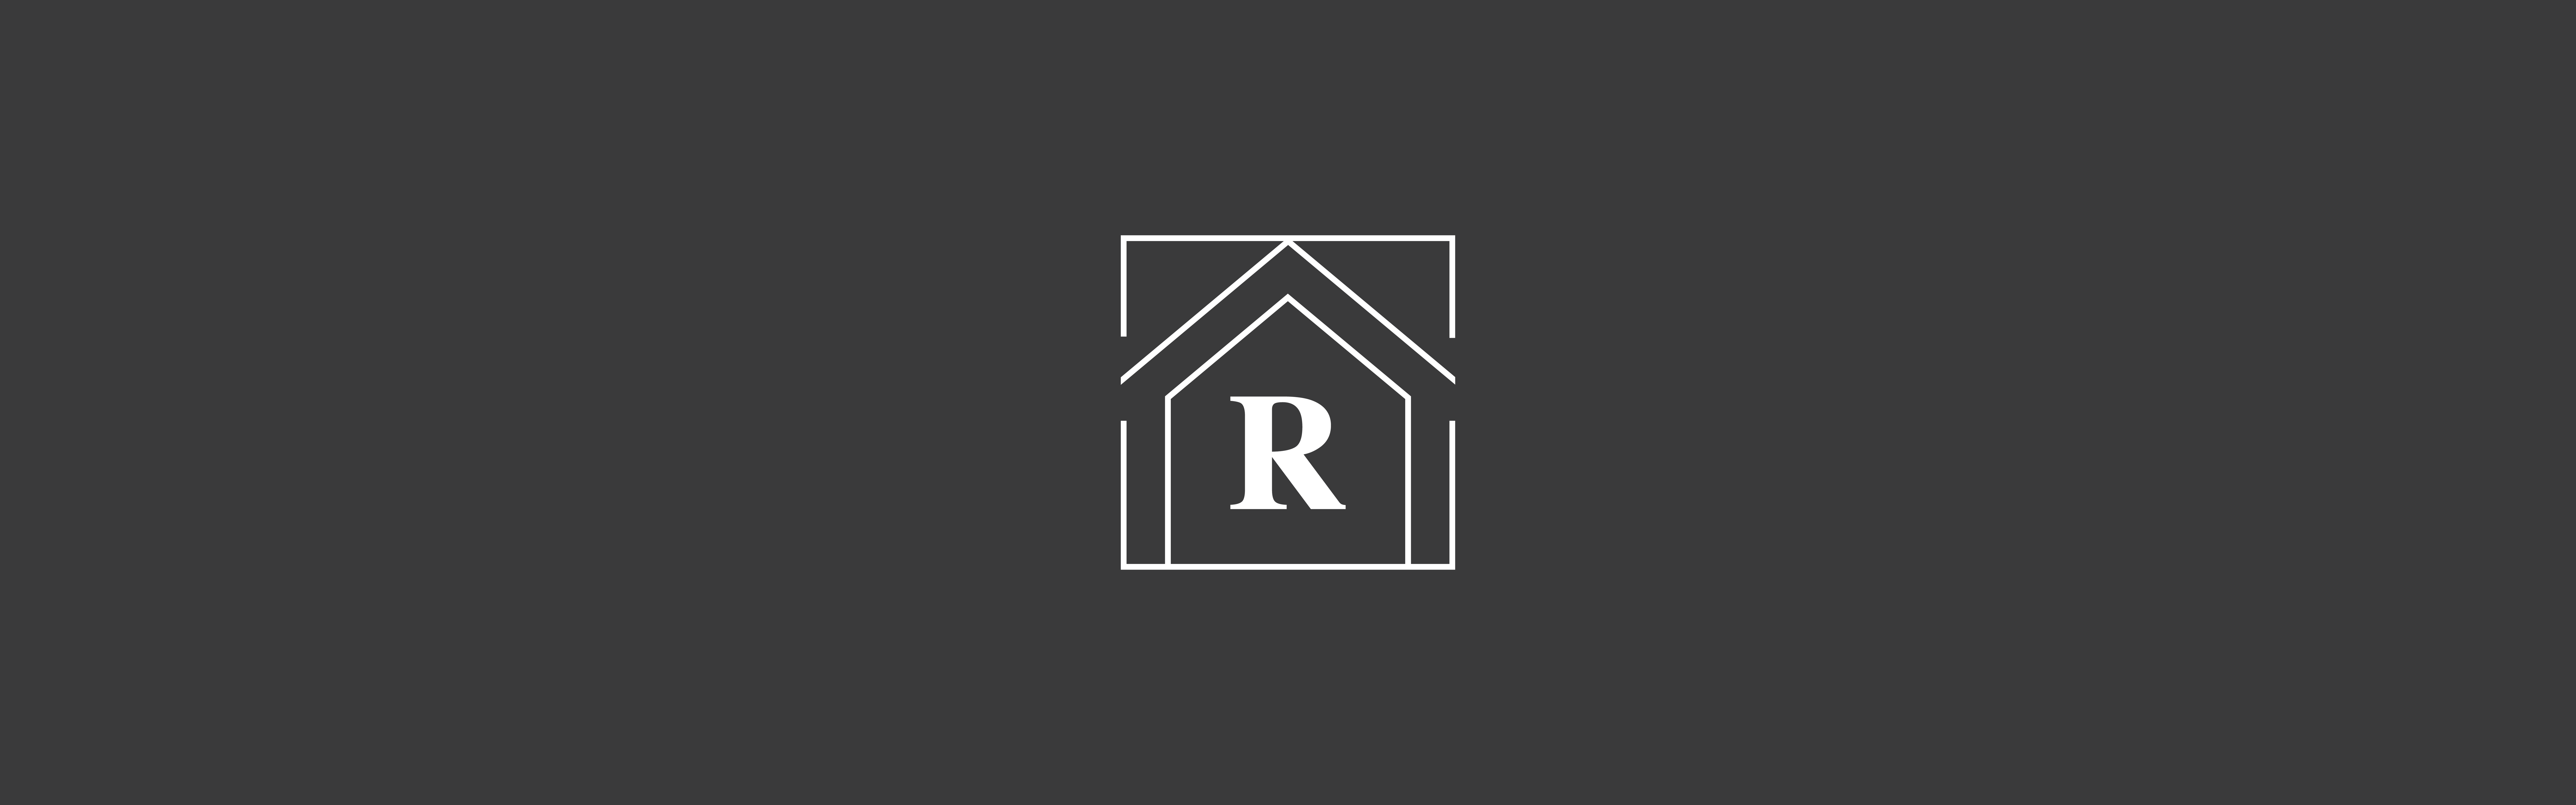 The image displays a monochromatic background featuring a central logo with the letter "r" inside of a double outline graphic representing Ridgewood Home Construction.